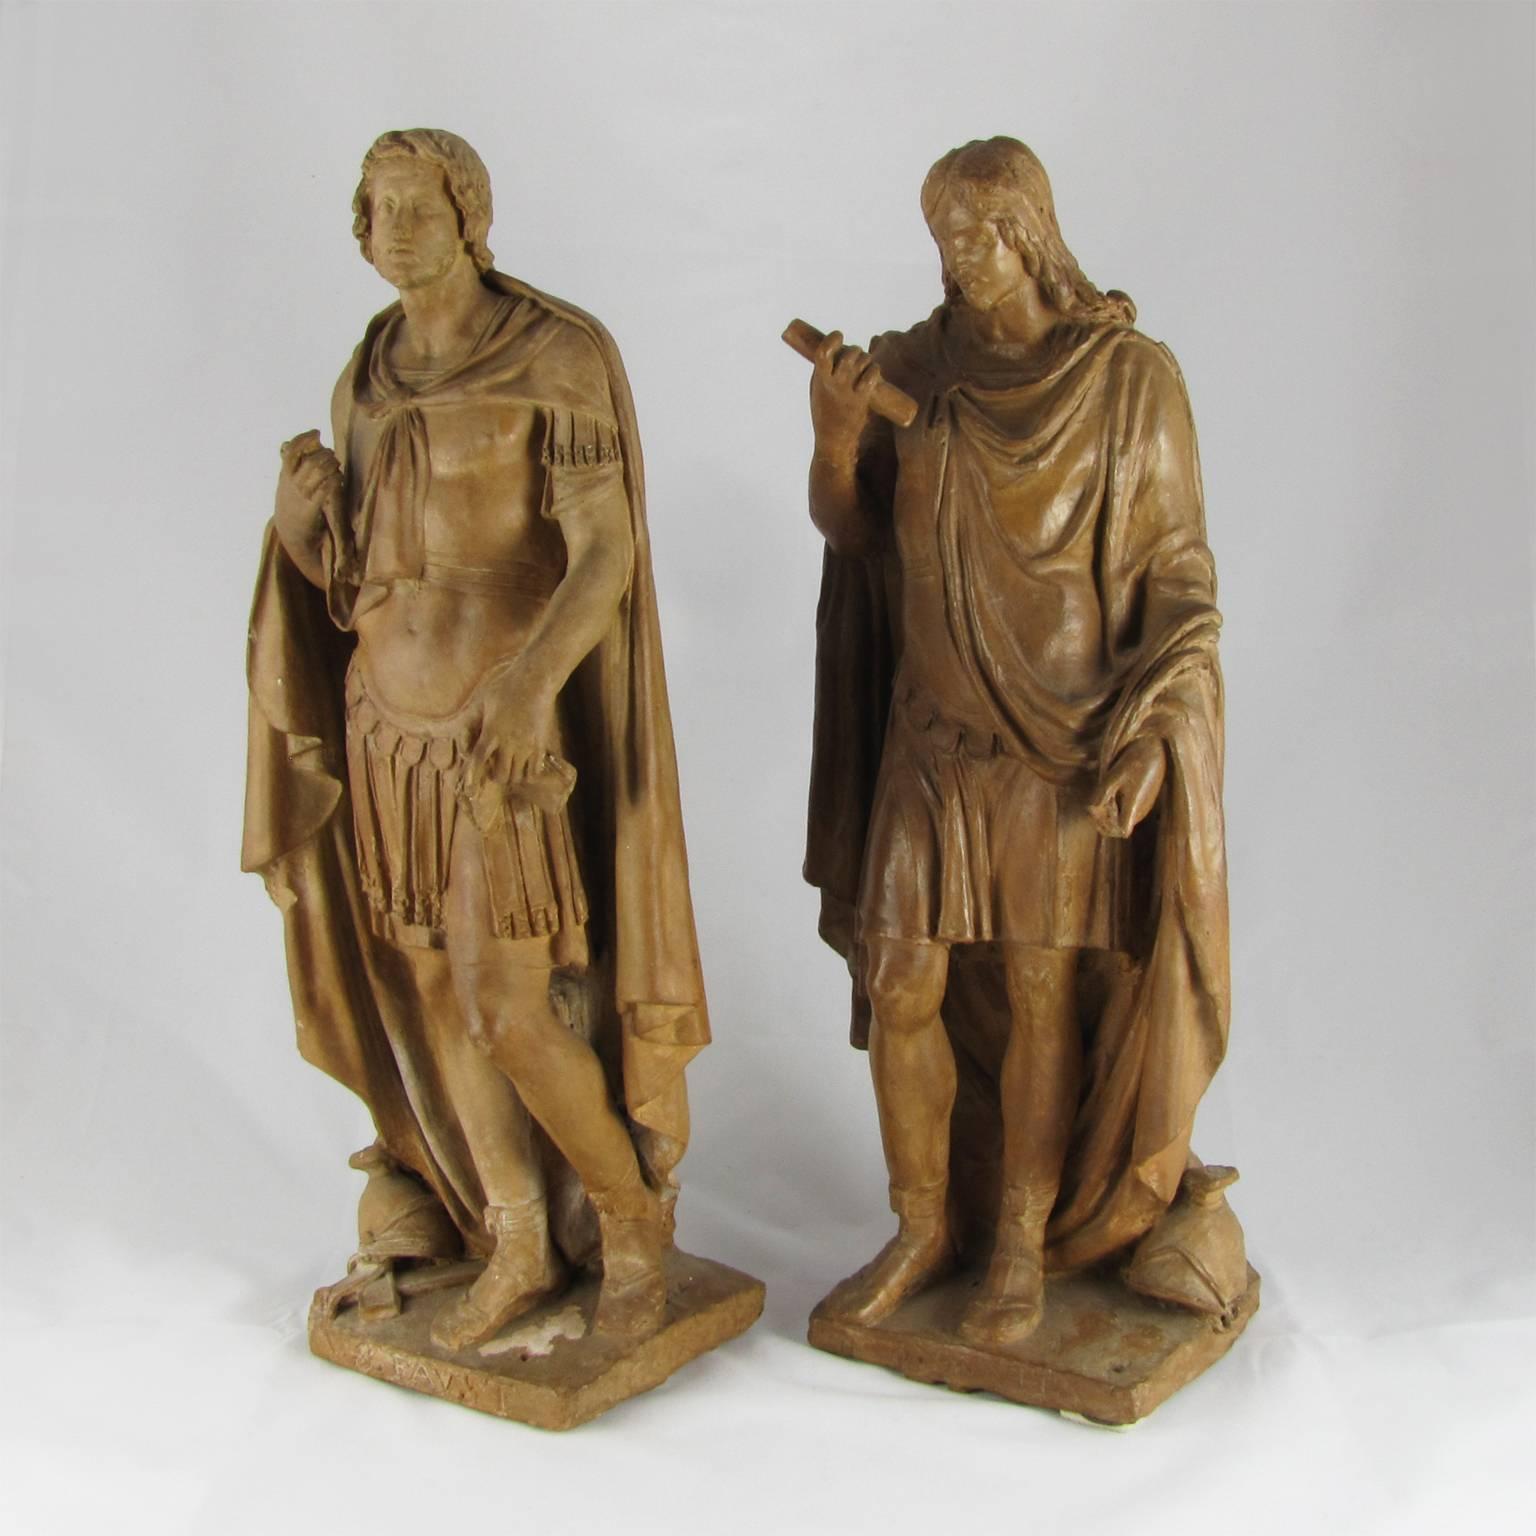 Two Early 18th Century Italian Unglazed Terracotta Sculptures Depicting Saints 5